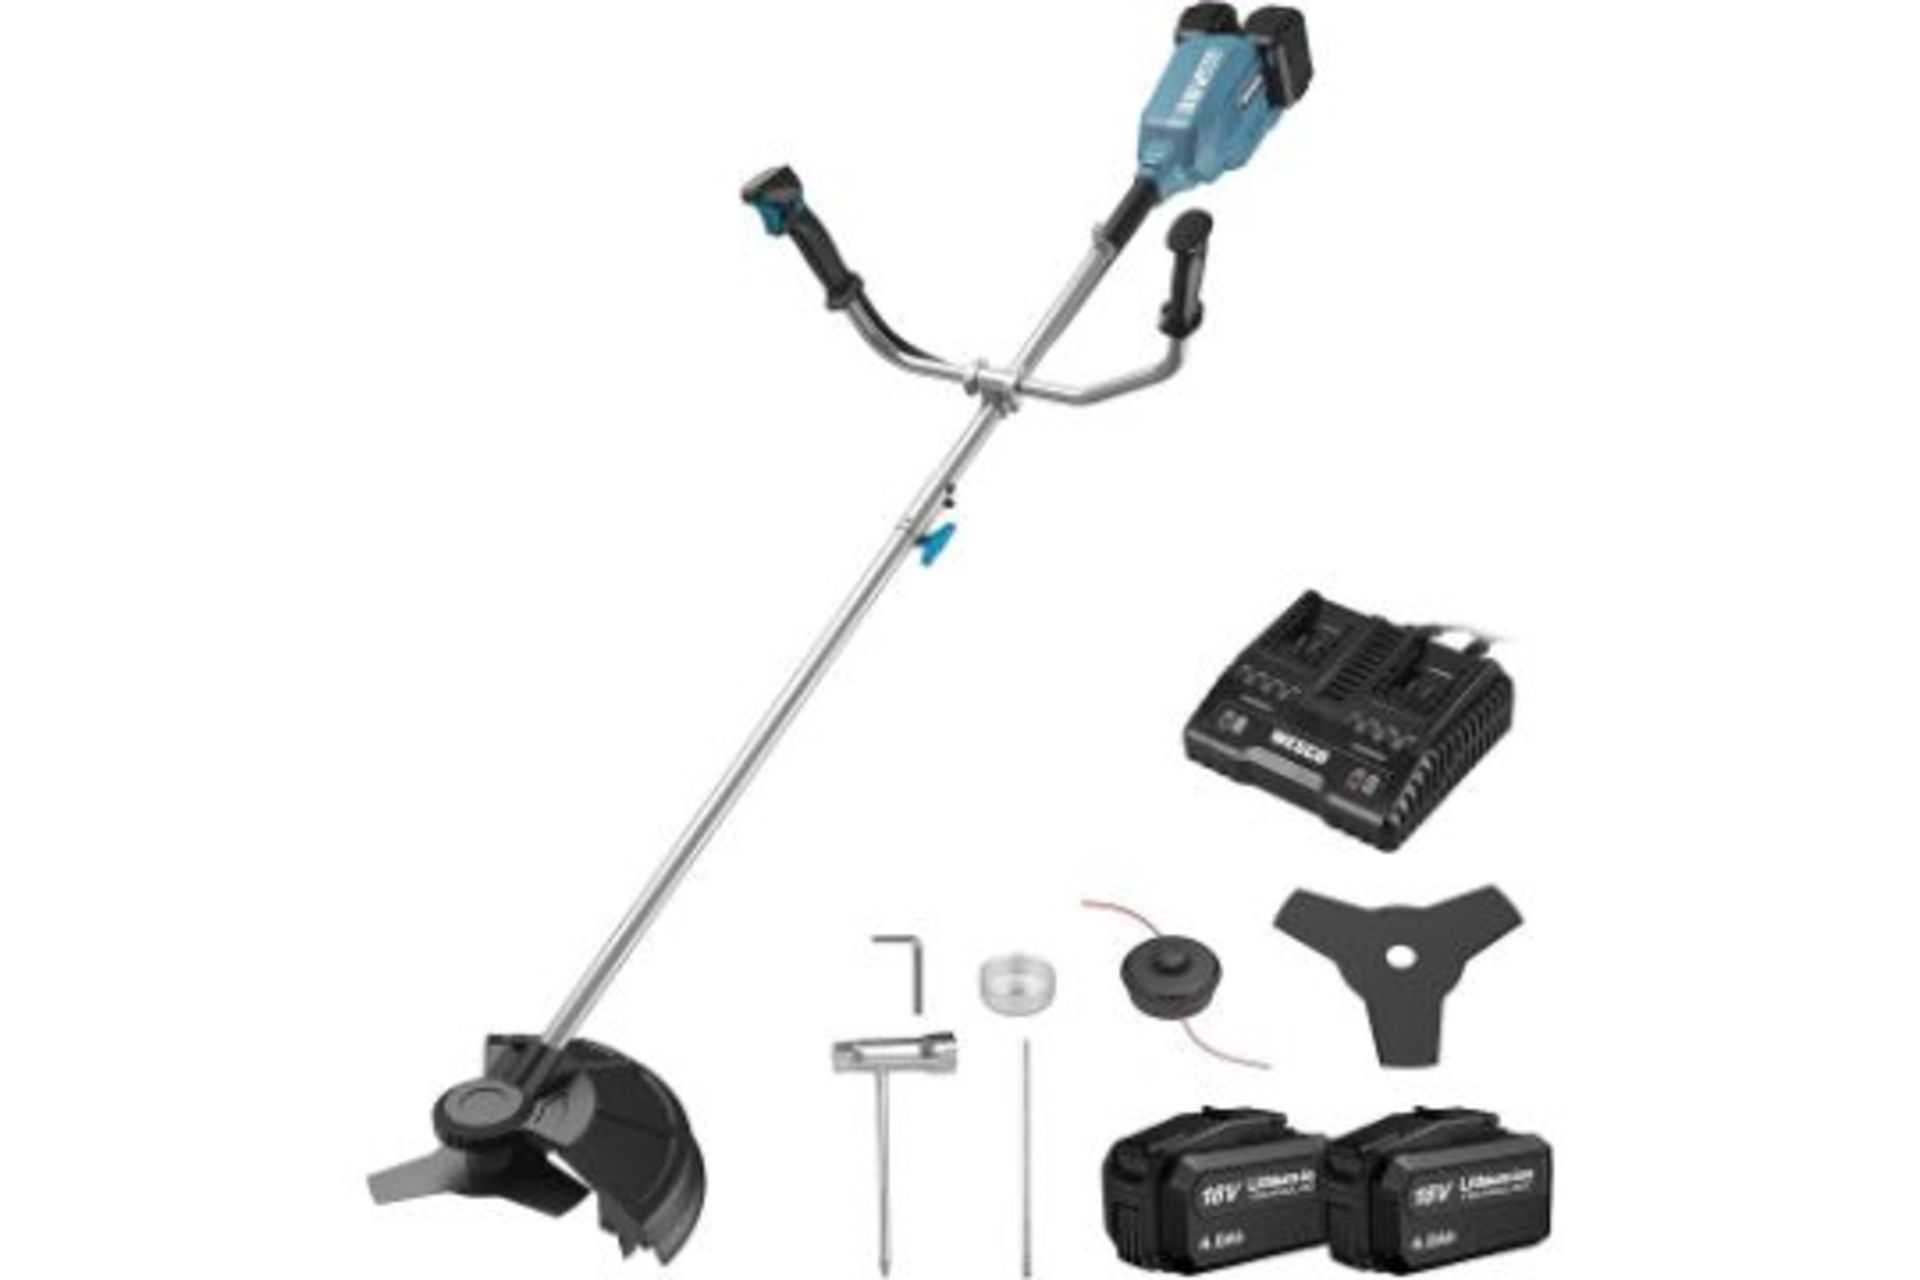 New & Boxed WESCO 2-in-1 String Trimmer/Edger with 36V 2 * 4.0 Ah Battery, 380 mm Max Cutting